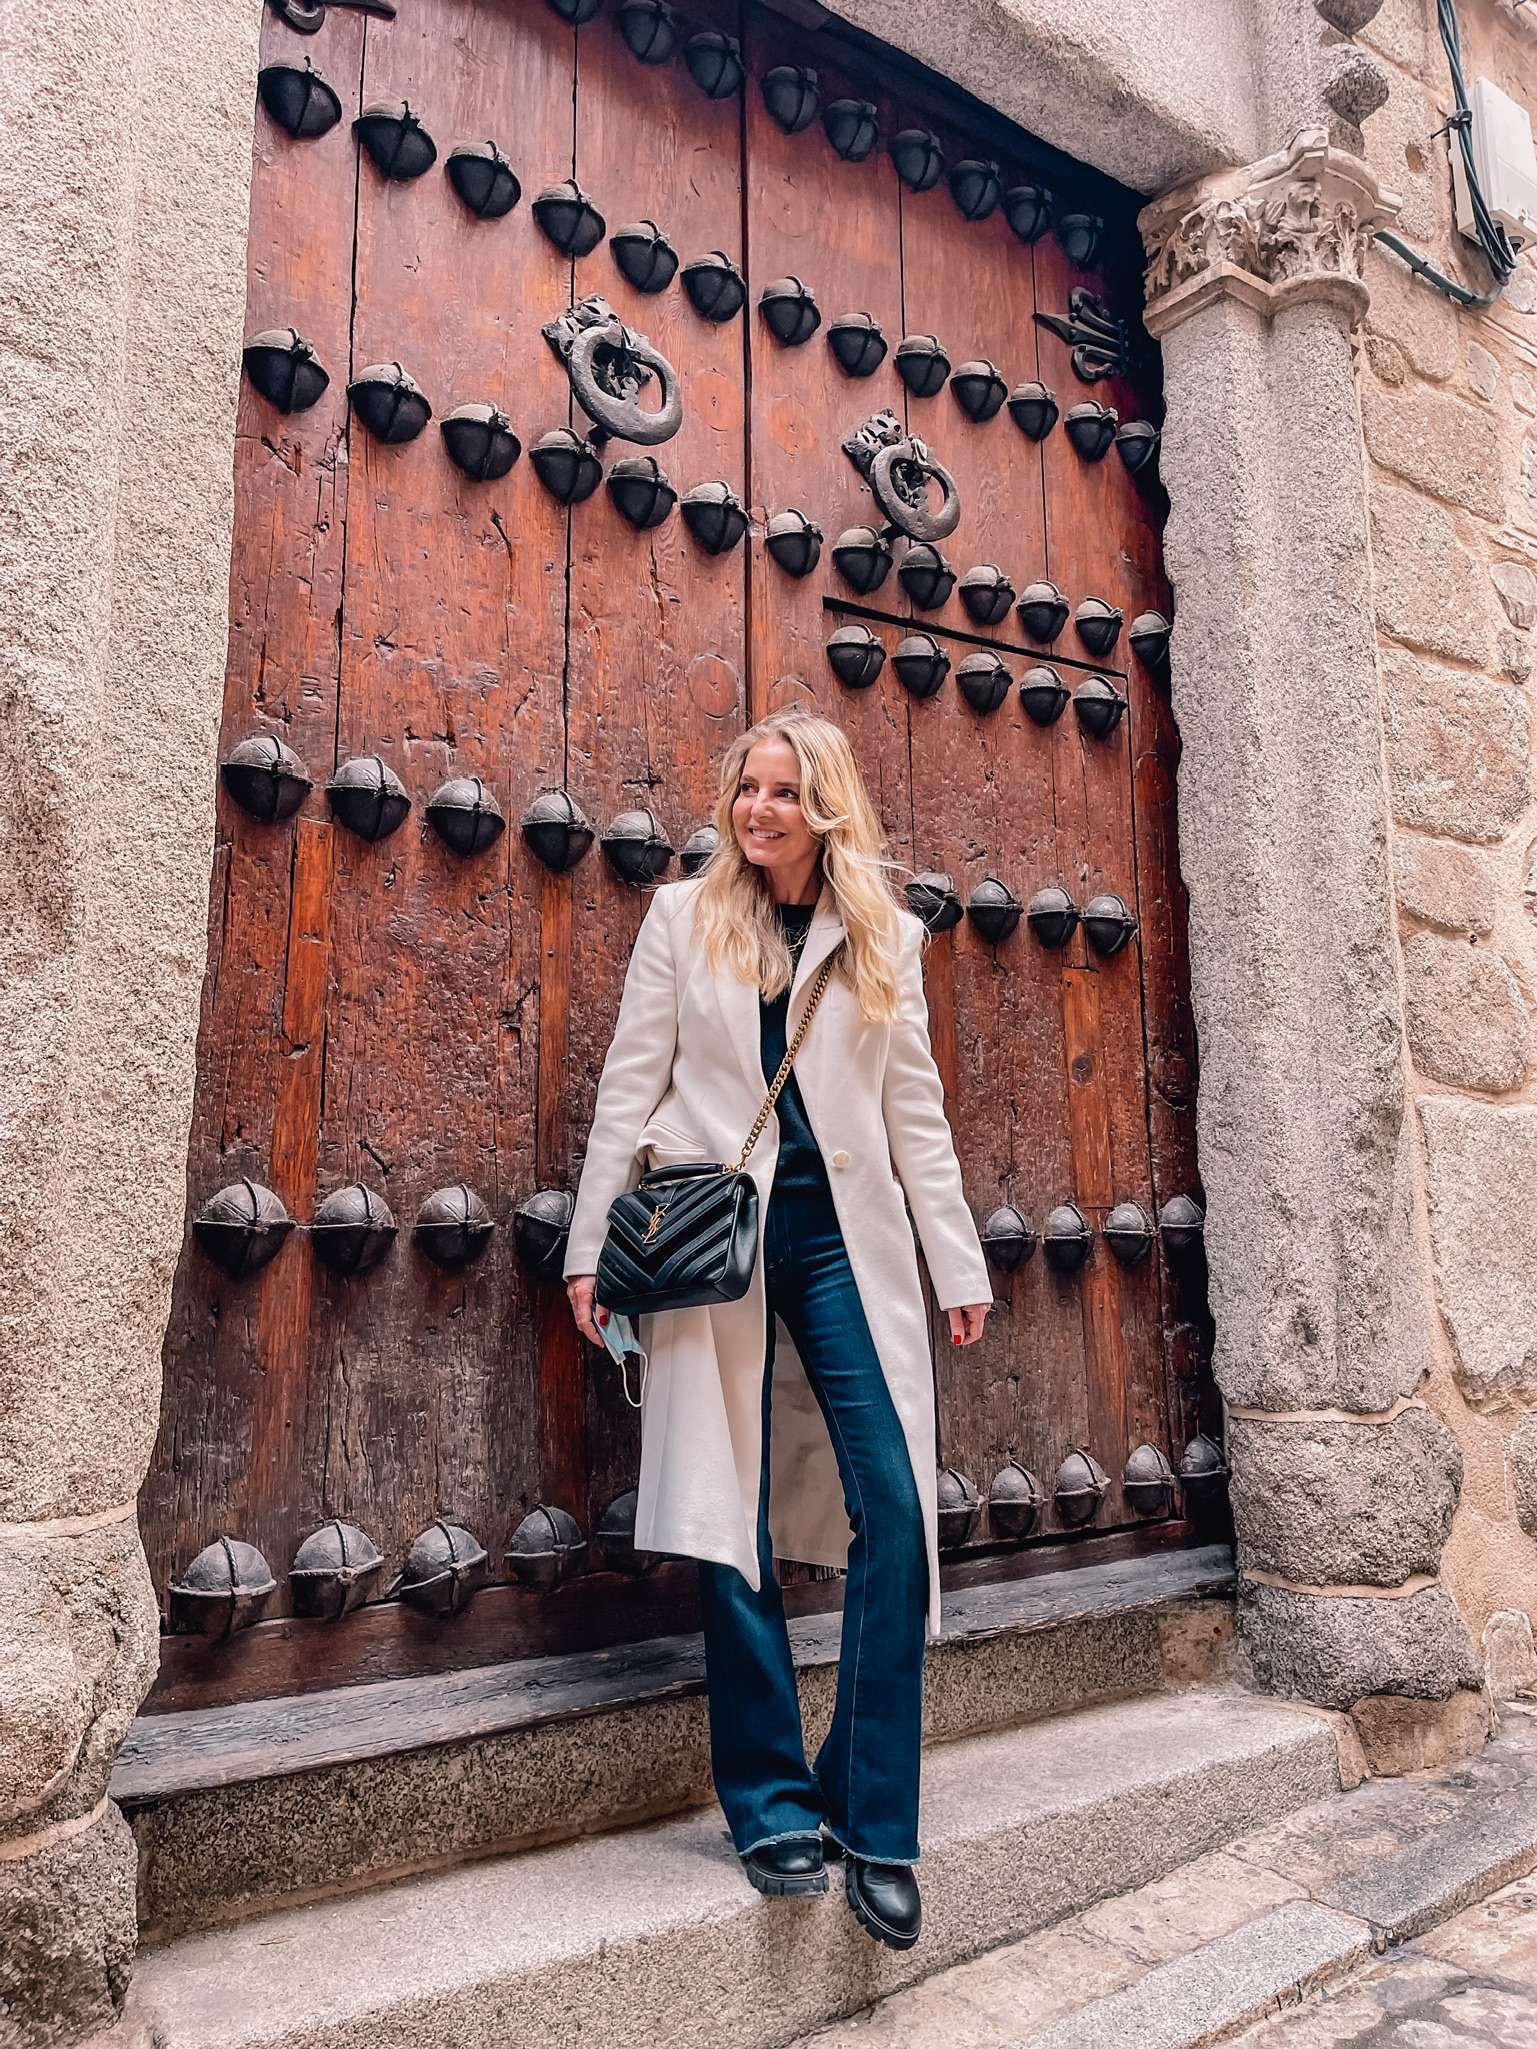 weekend trips from spain, weekend trips from madrid, where to visit near spain, best weekend trips from madrid, erin busbee, toldeo, spain, pueblos blancos, express coat, mother flare jeans, ysl chevron bag, aqua cashmere sweater